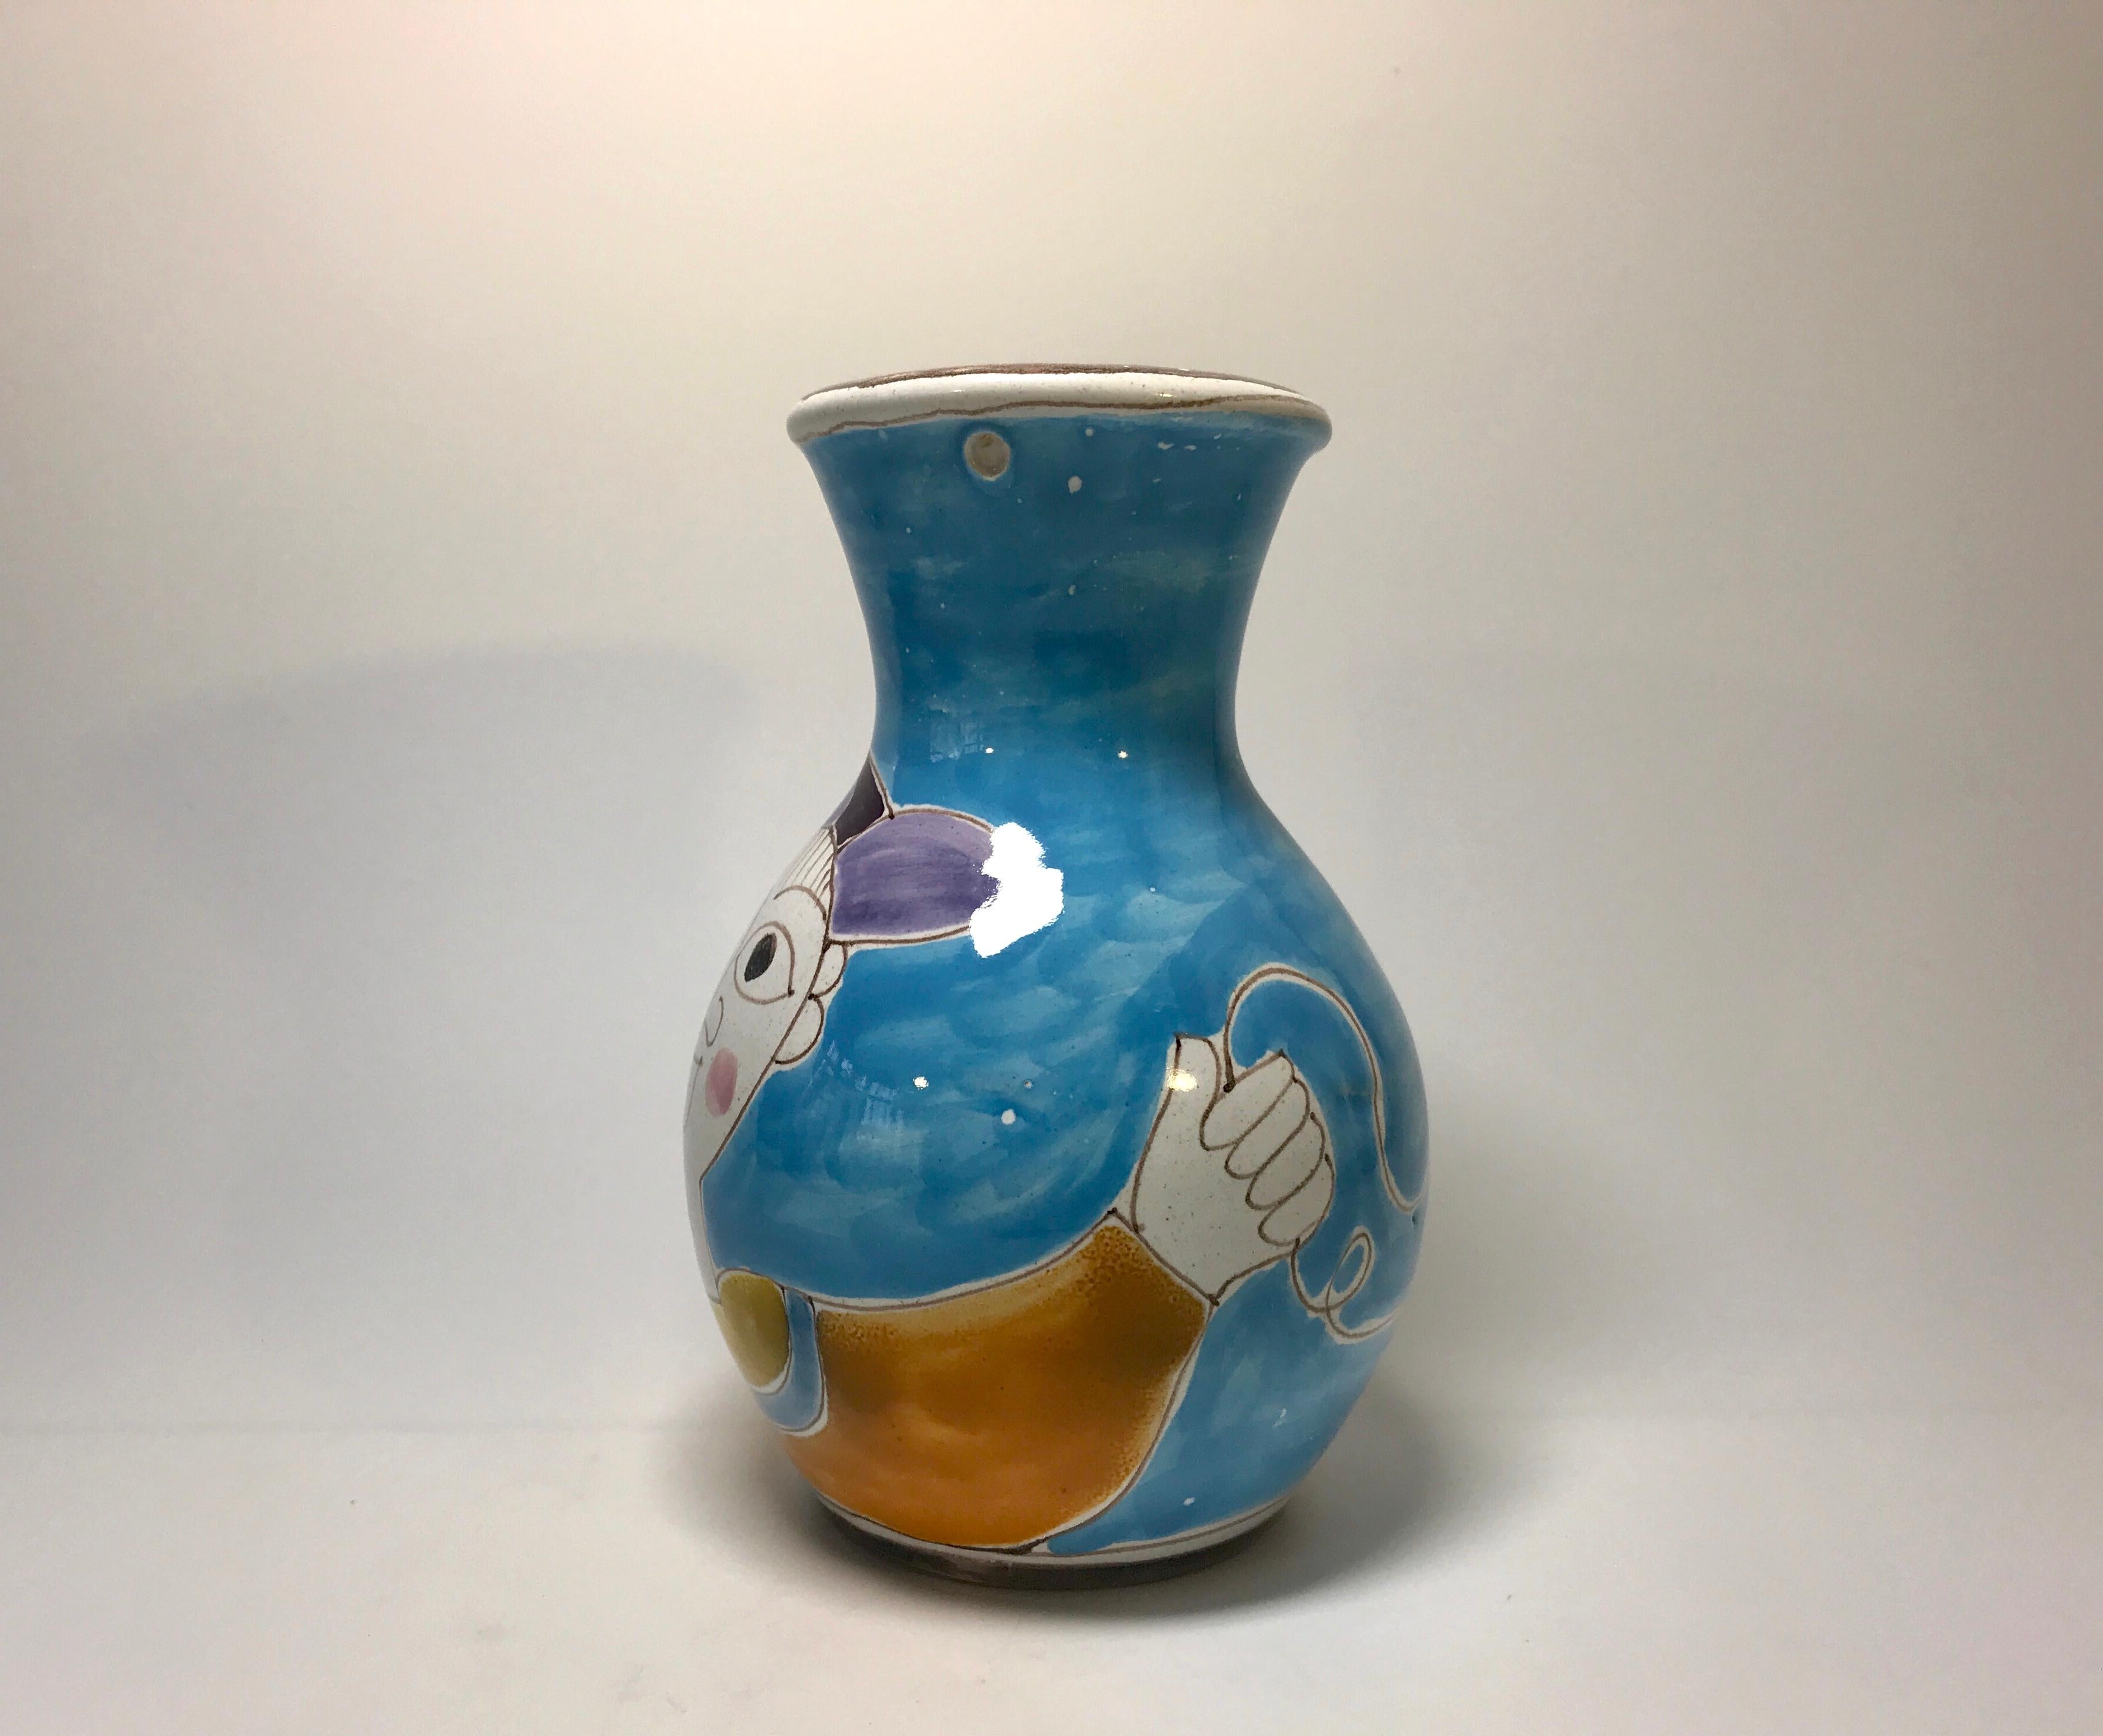 DeSimone of Italy, hand painted shaped ceramic vase of a boy and his red spinning top
A fun vase from DeSimone,
circa 1960s
Signed DeSimone, Italy
Measures: Height 5.5 inch, diameter 3.25 inch
Good condition and joyful colors. Small hole from